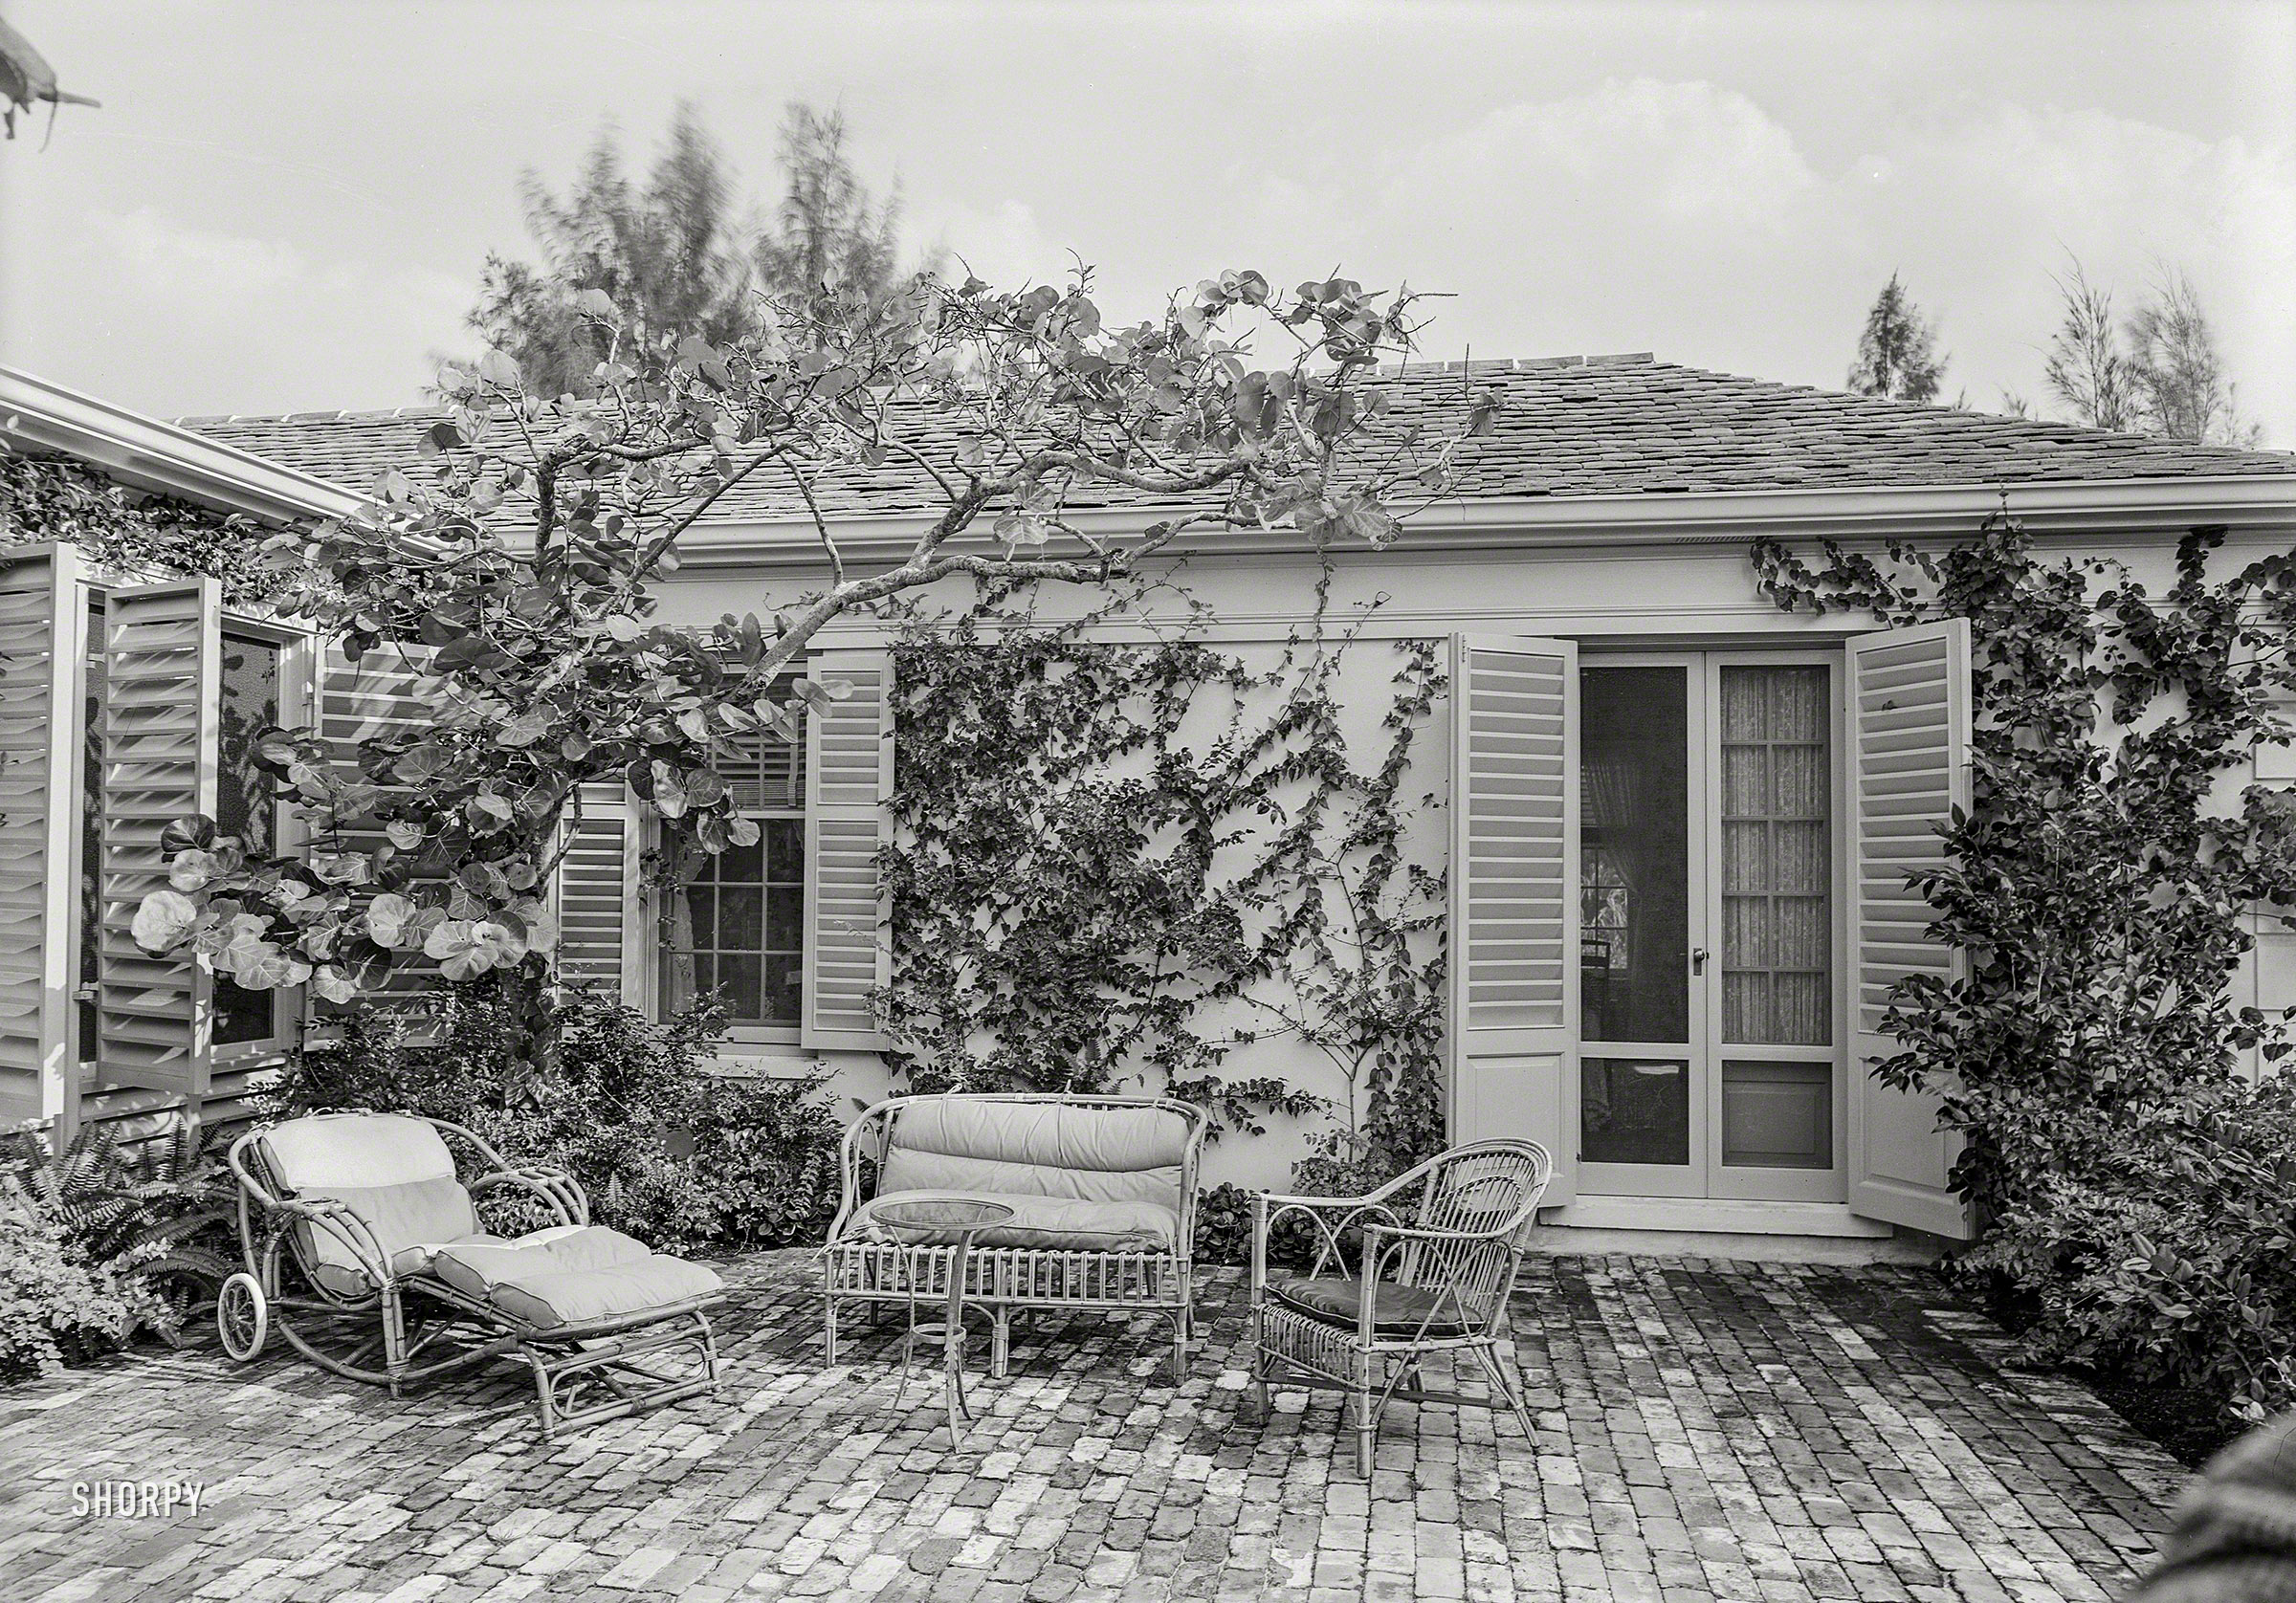 March 29, 1941. "James H. McGraw Jr. residence in Hobe Sound, Florida. Patio. Henry Corse, architect." Gottscho-Schleisner photo. View full size.